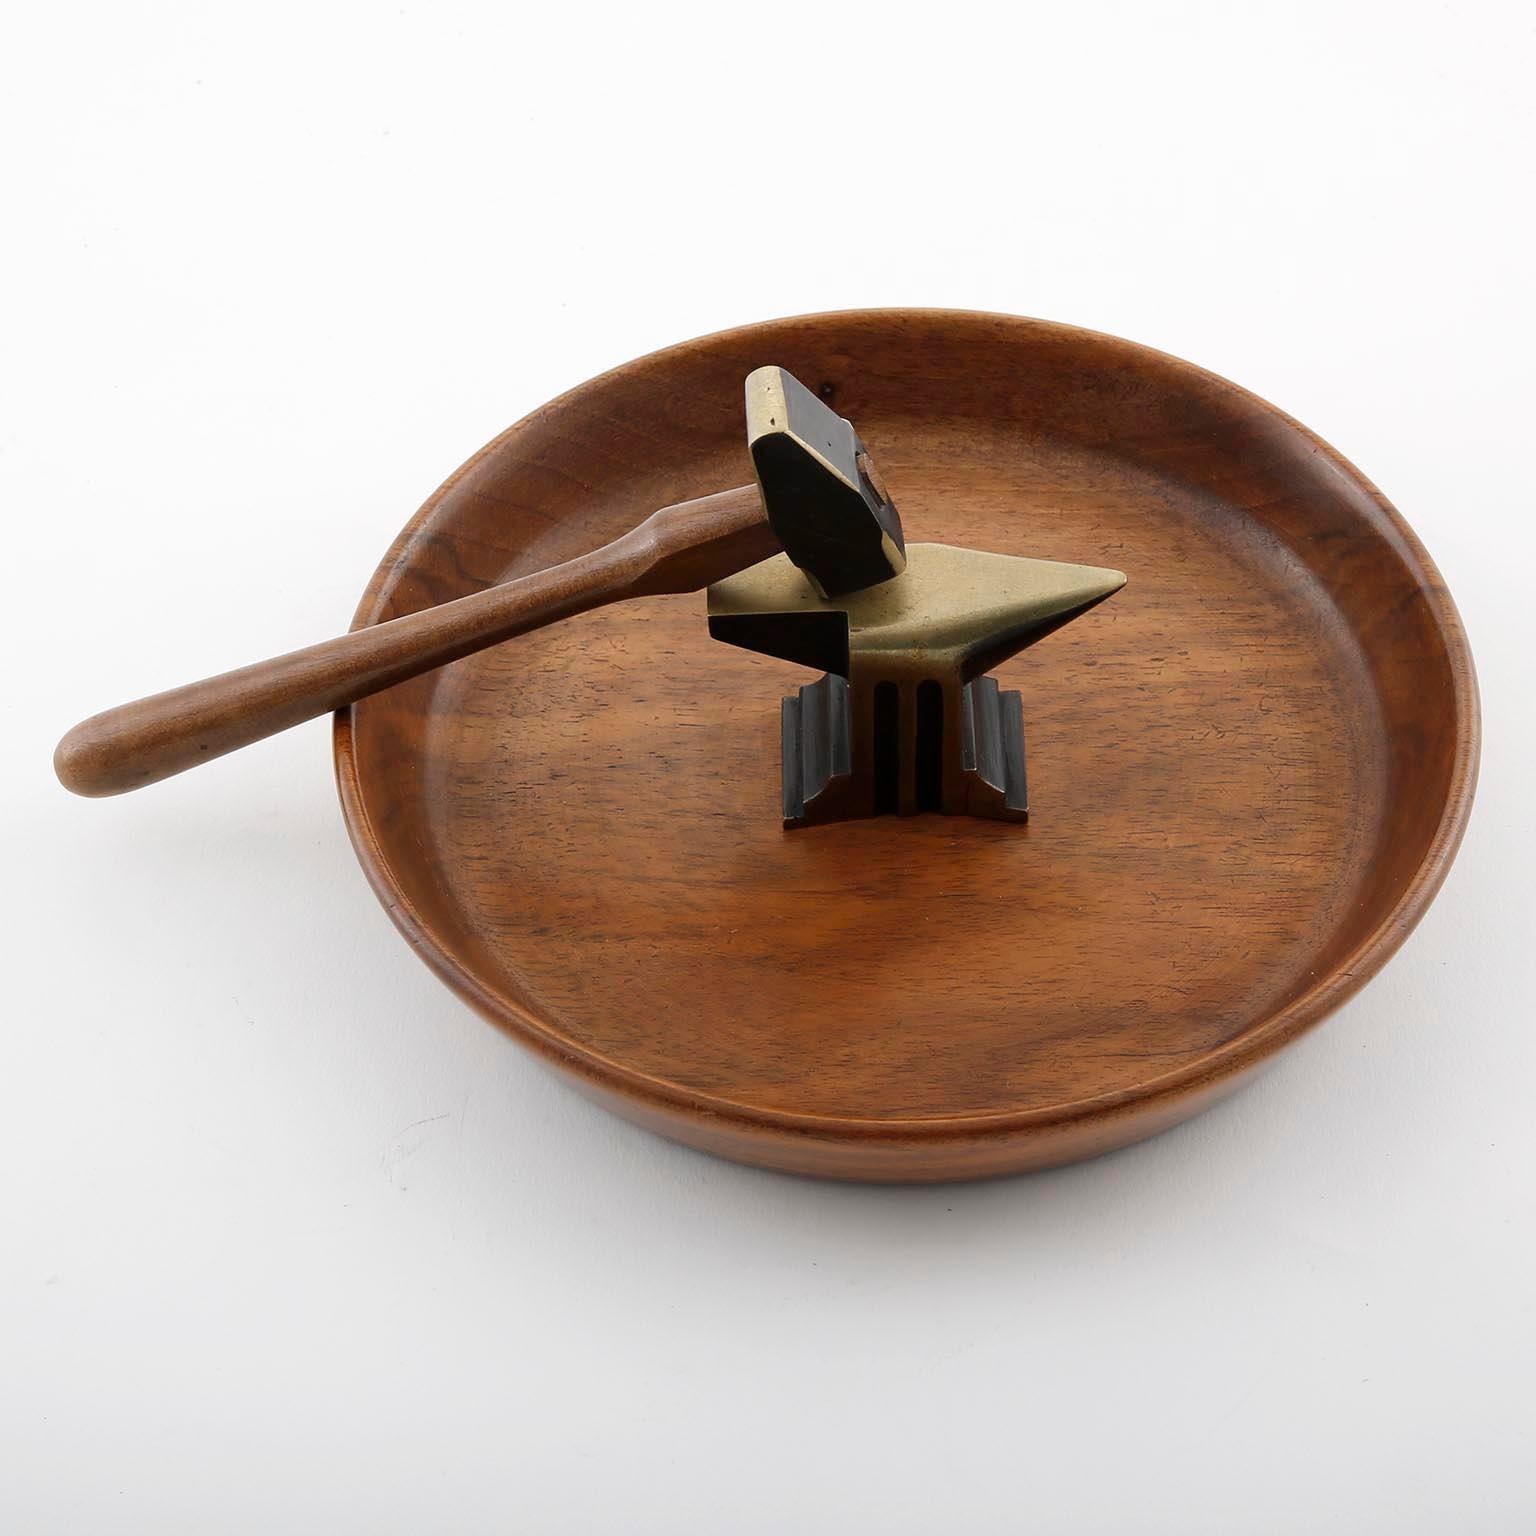 A Mid-Century Modern nutcracker set consists of an organic shaped nutwood bowl and a blackened solid brass amboss with hammer, designed by Richard Rohac, manufactured in Vienna, Austria, circa 1950.